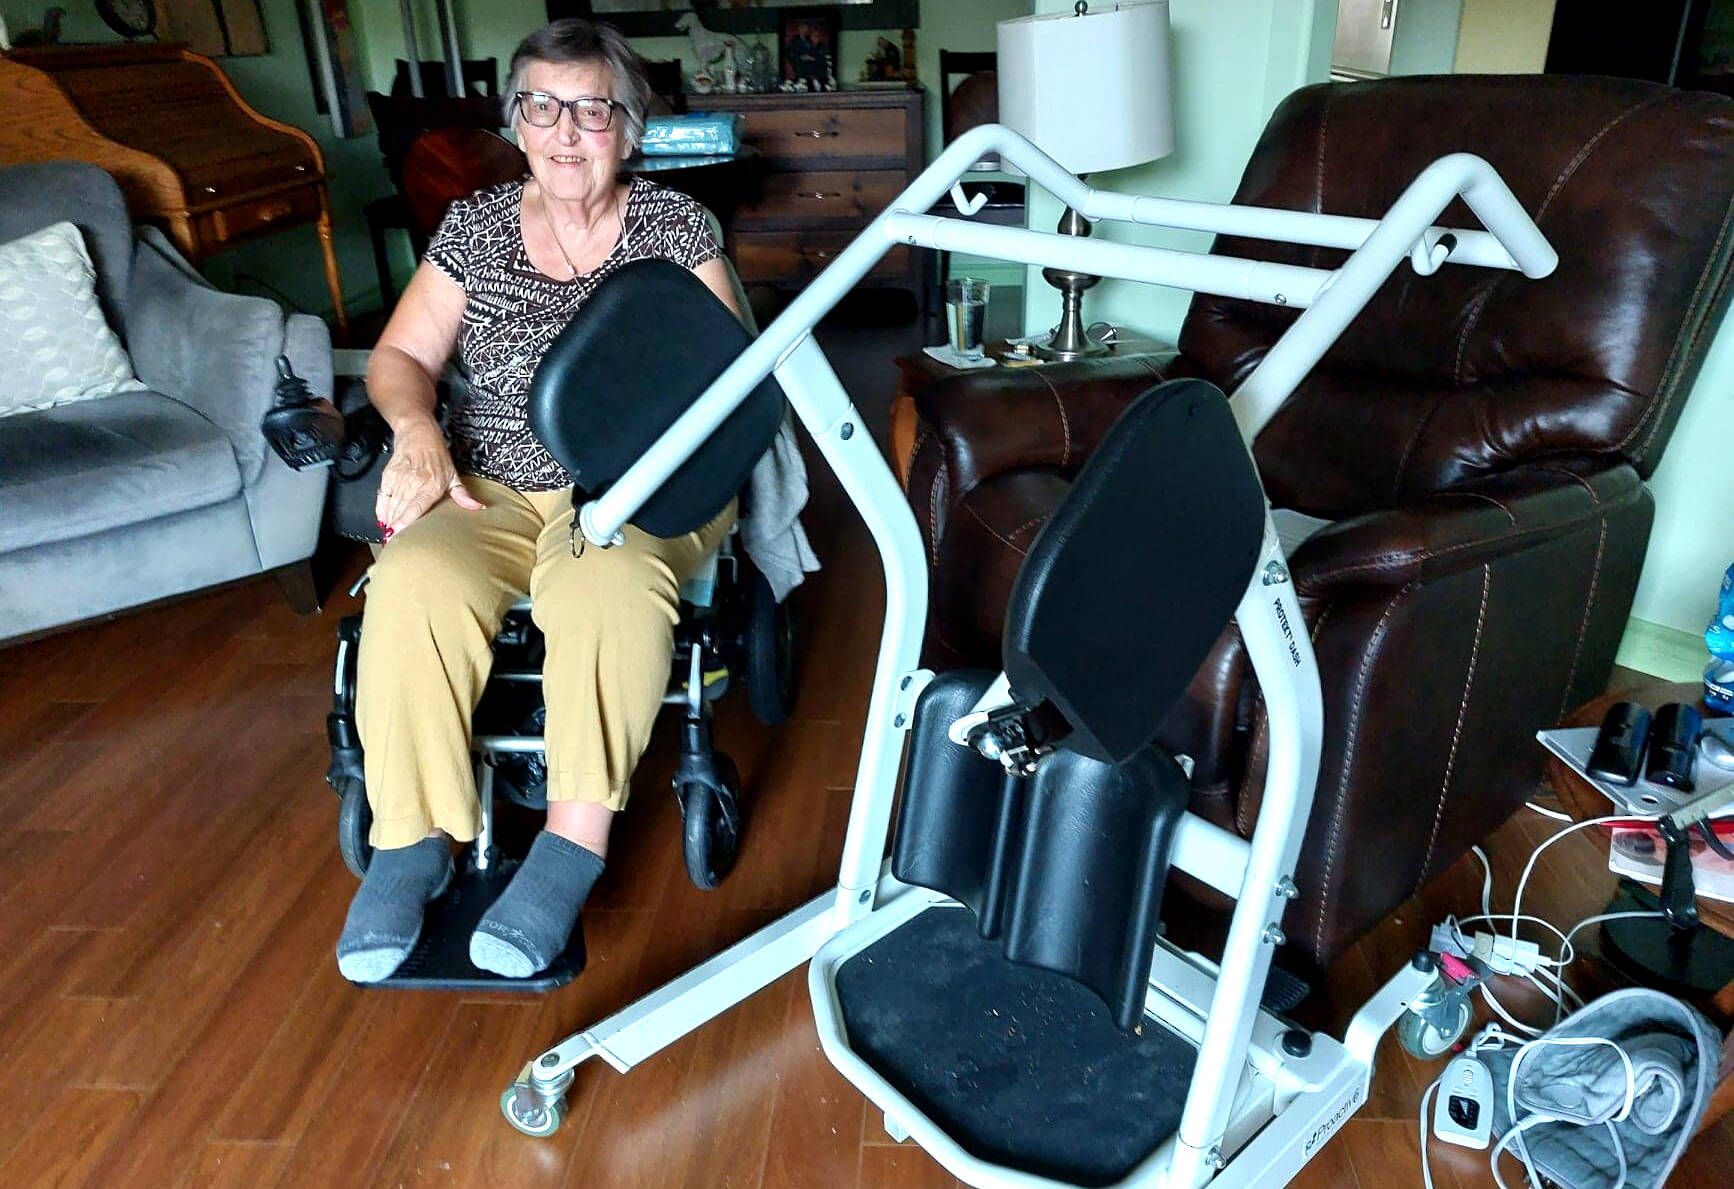 Pamela Garrity, 77, has been confined to a wheelchair since falling out of bed in late September, and relies on a Sarastand (right) to get in and out of bed, get on and off the toilet and do other things. (Eric J. Welsh/ The Progress)